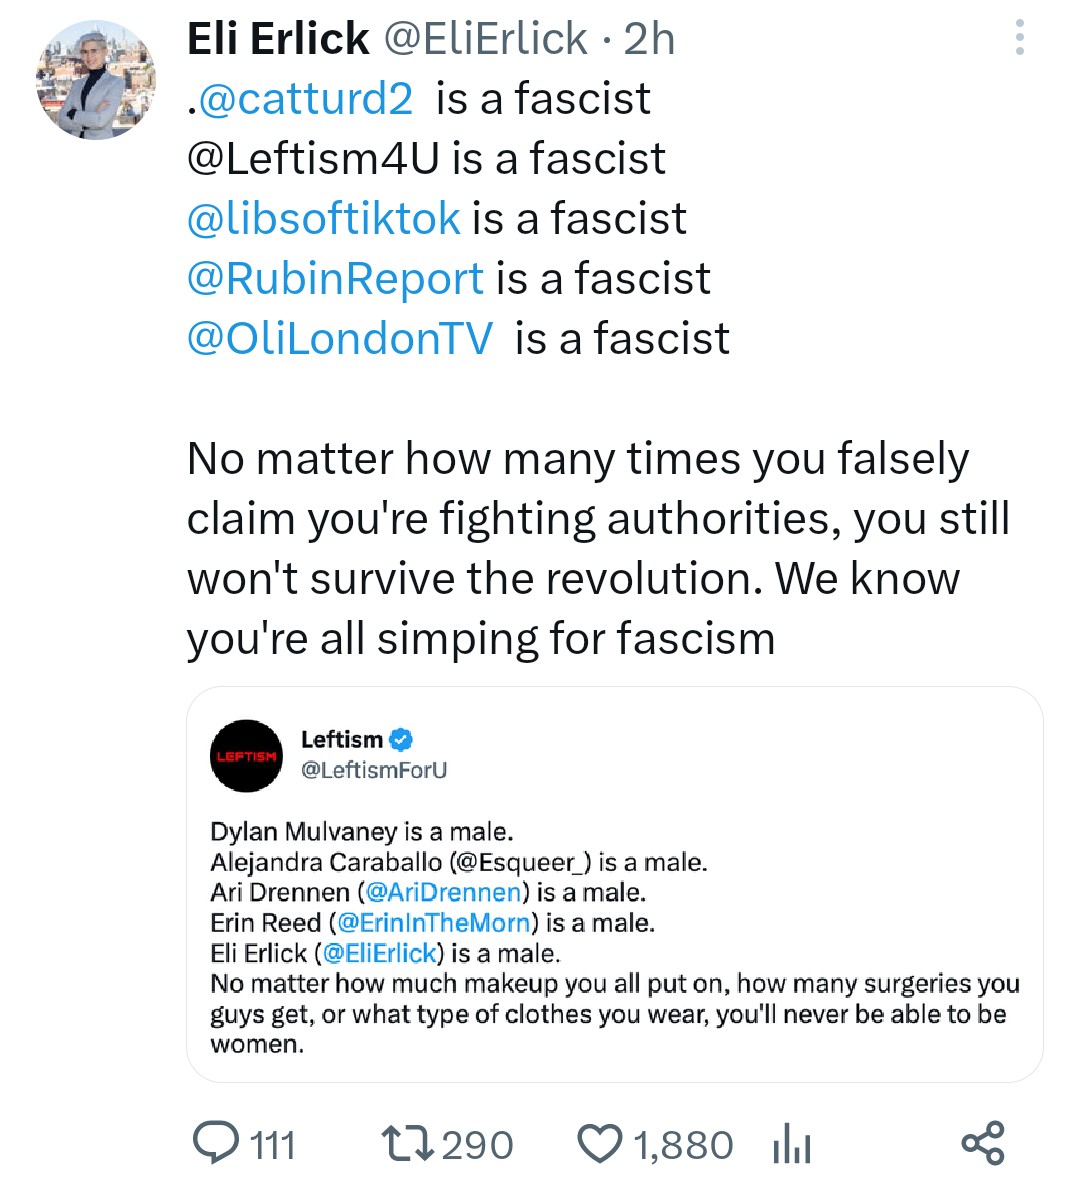 If believing in biology makes me a fascist and if being such a 'fascist' means that I get to be on the same side as @catturd2, @libsoftiktok, @RubinReport, and @OliLondonTV, then I'll proudly be one. (Just some advice @EliErlick, learn what fascism is.)